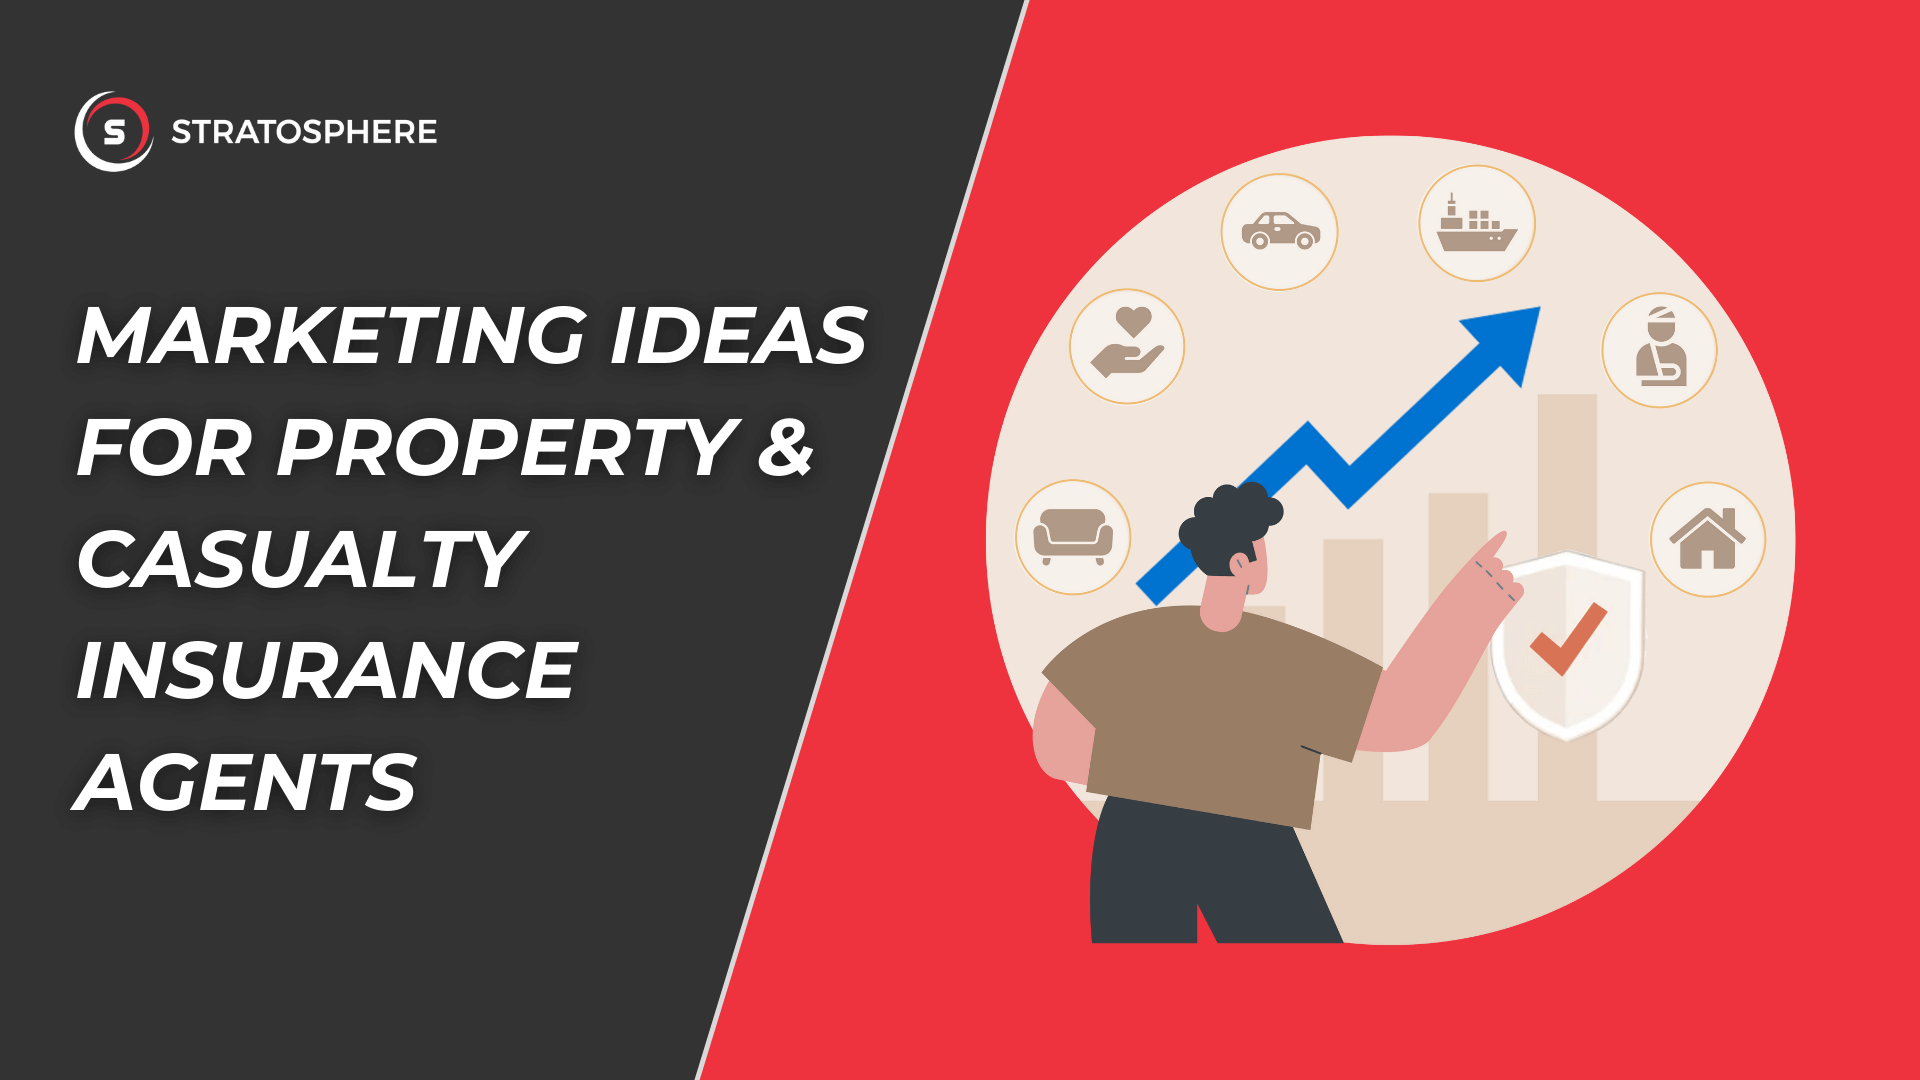 11 Effective Marketing Ideas for Property & Casualty Insurance Agents